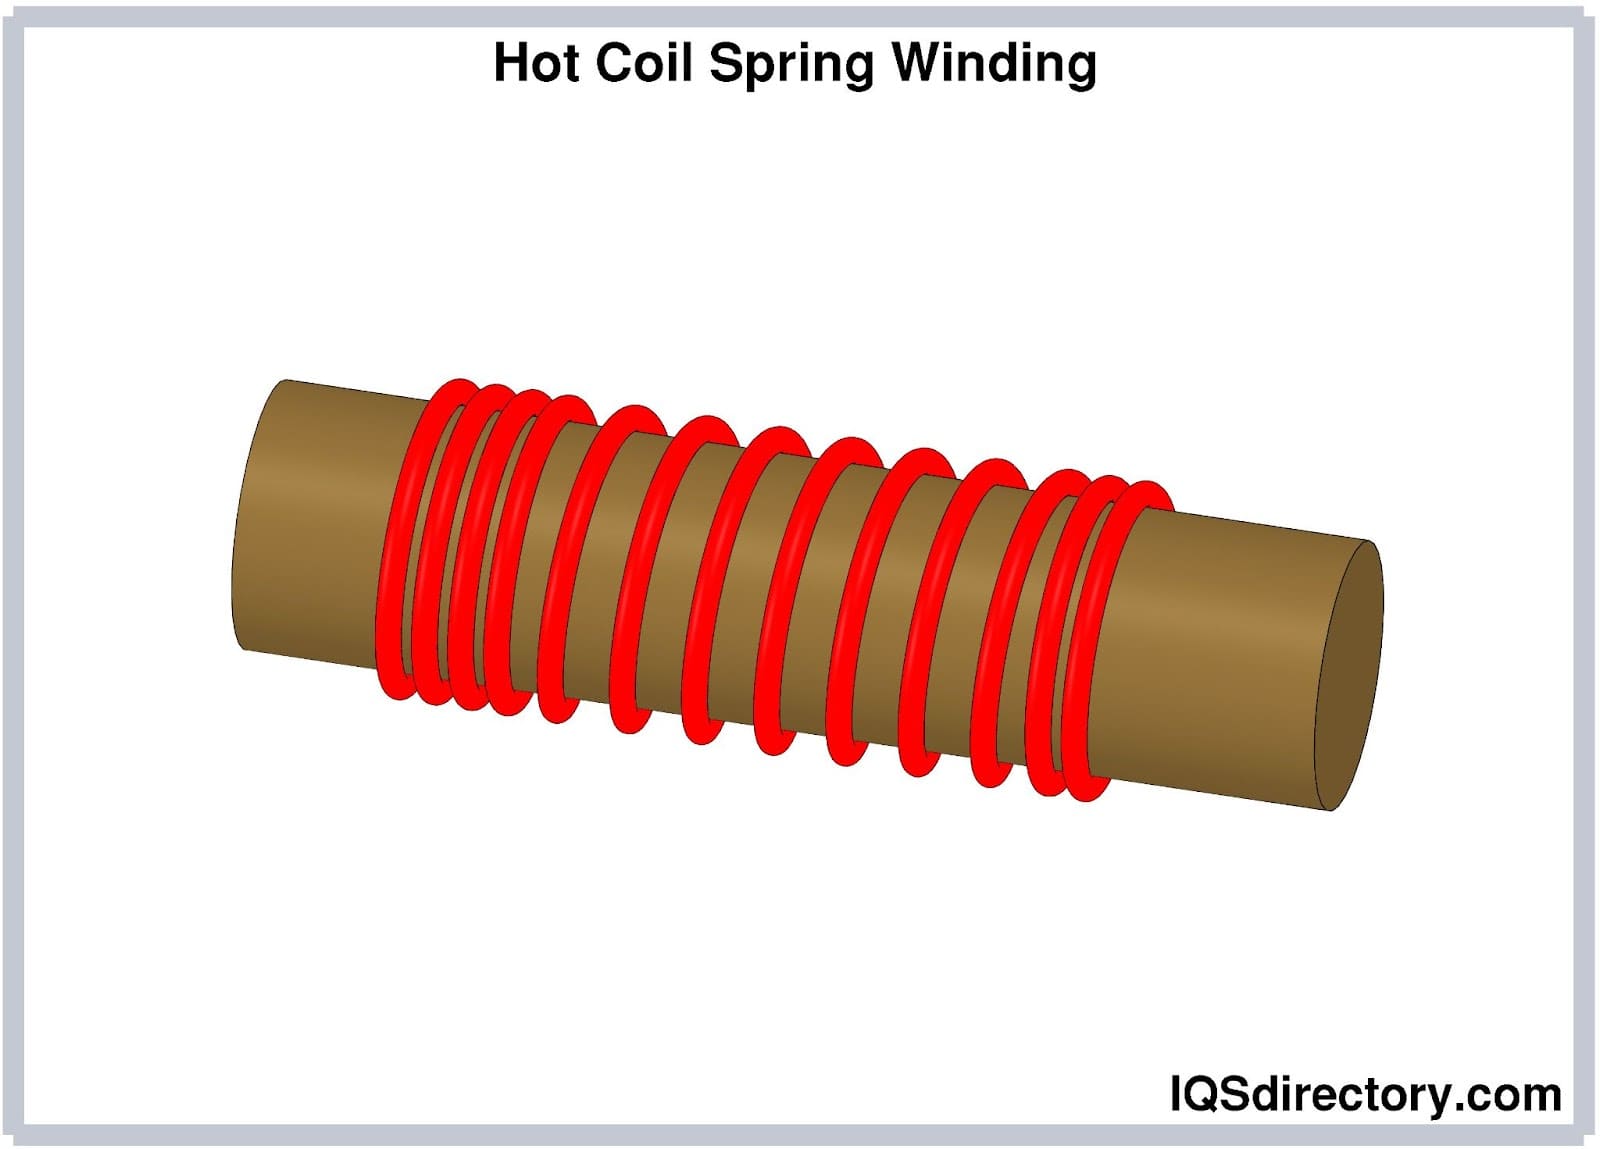 Hot Coil Spring Winding